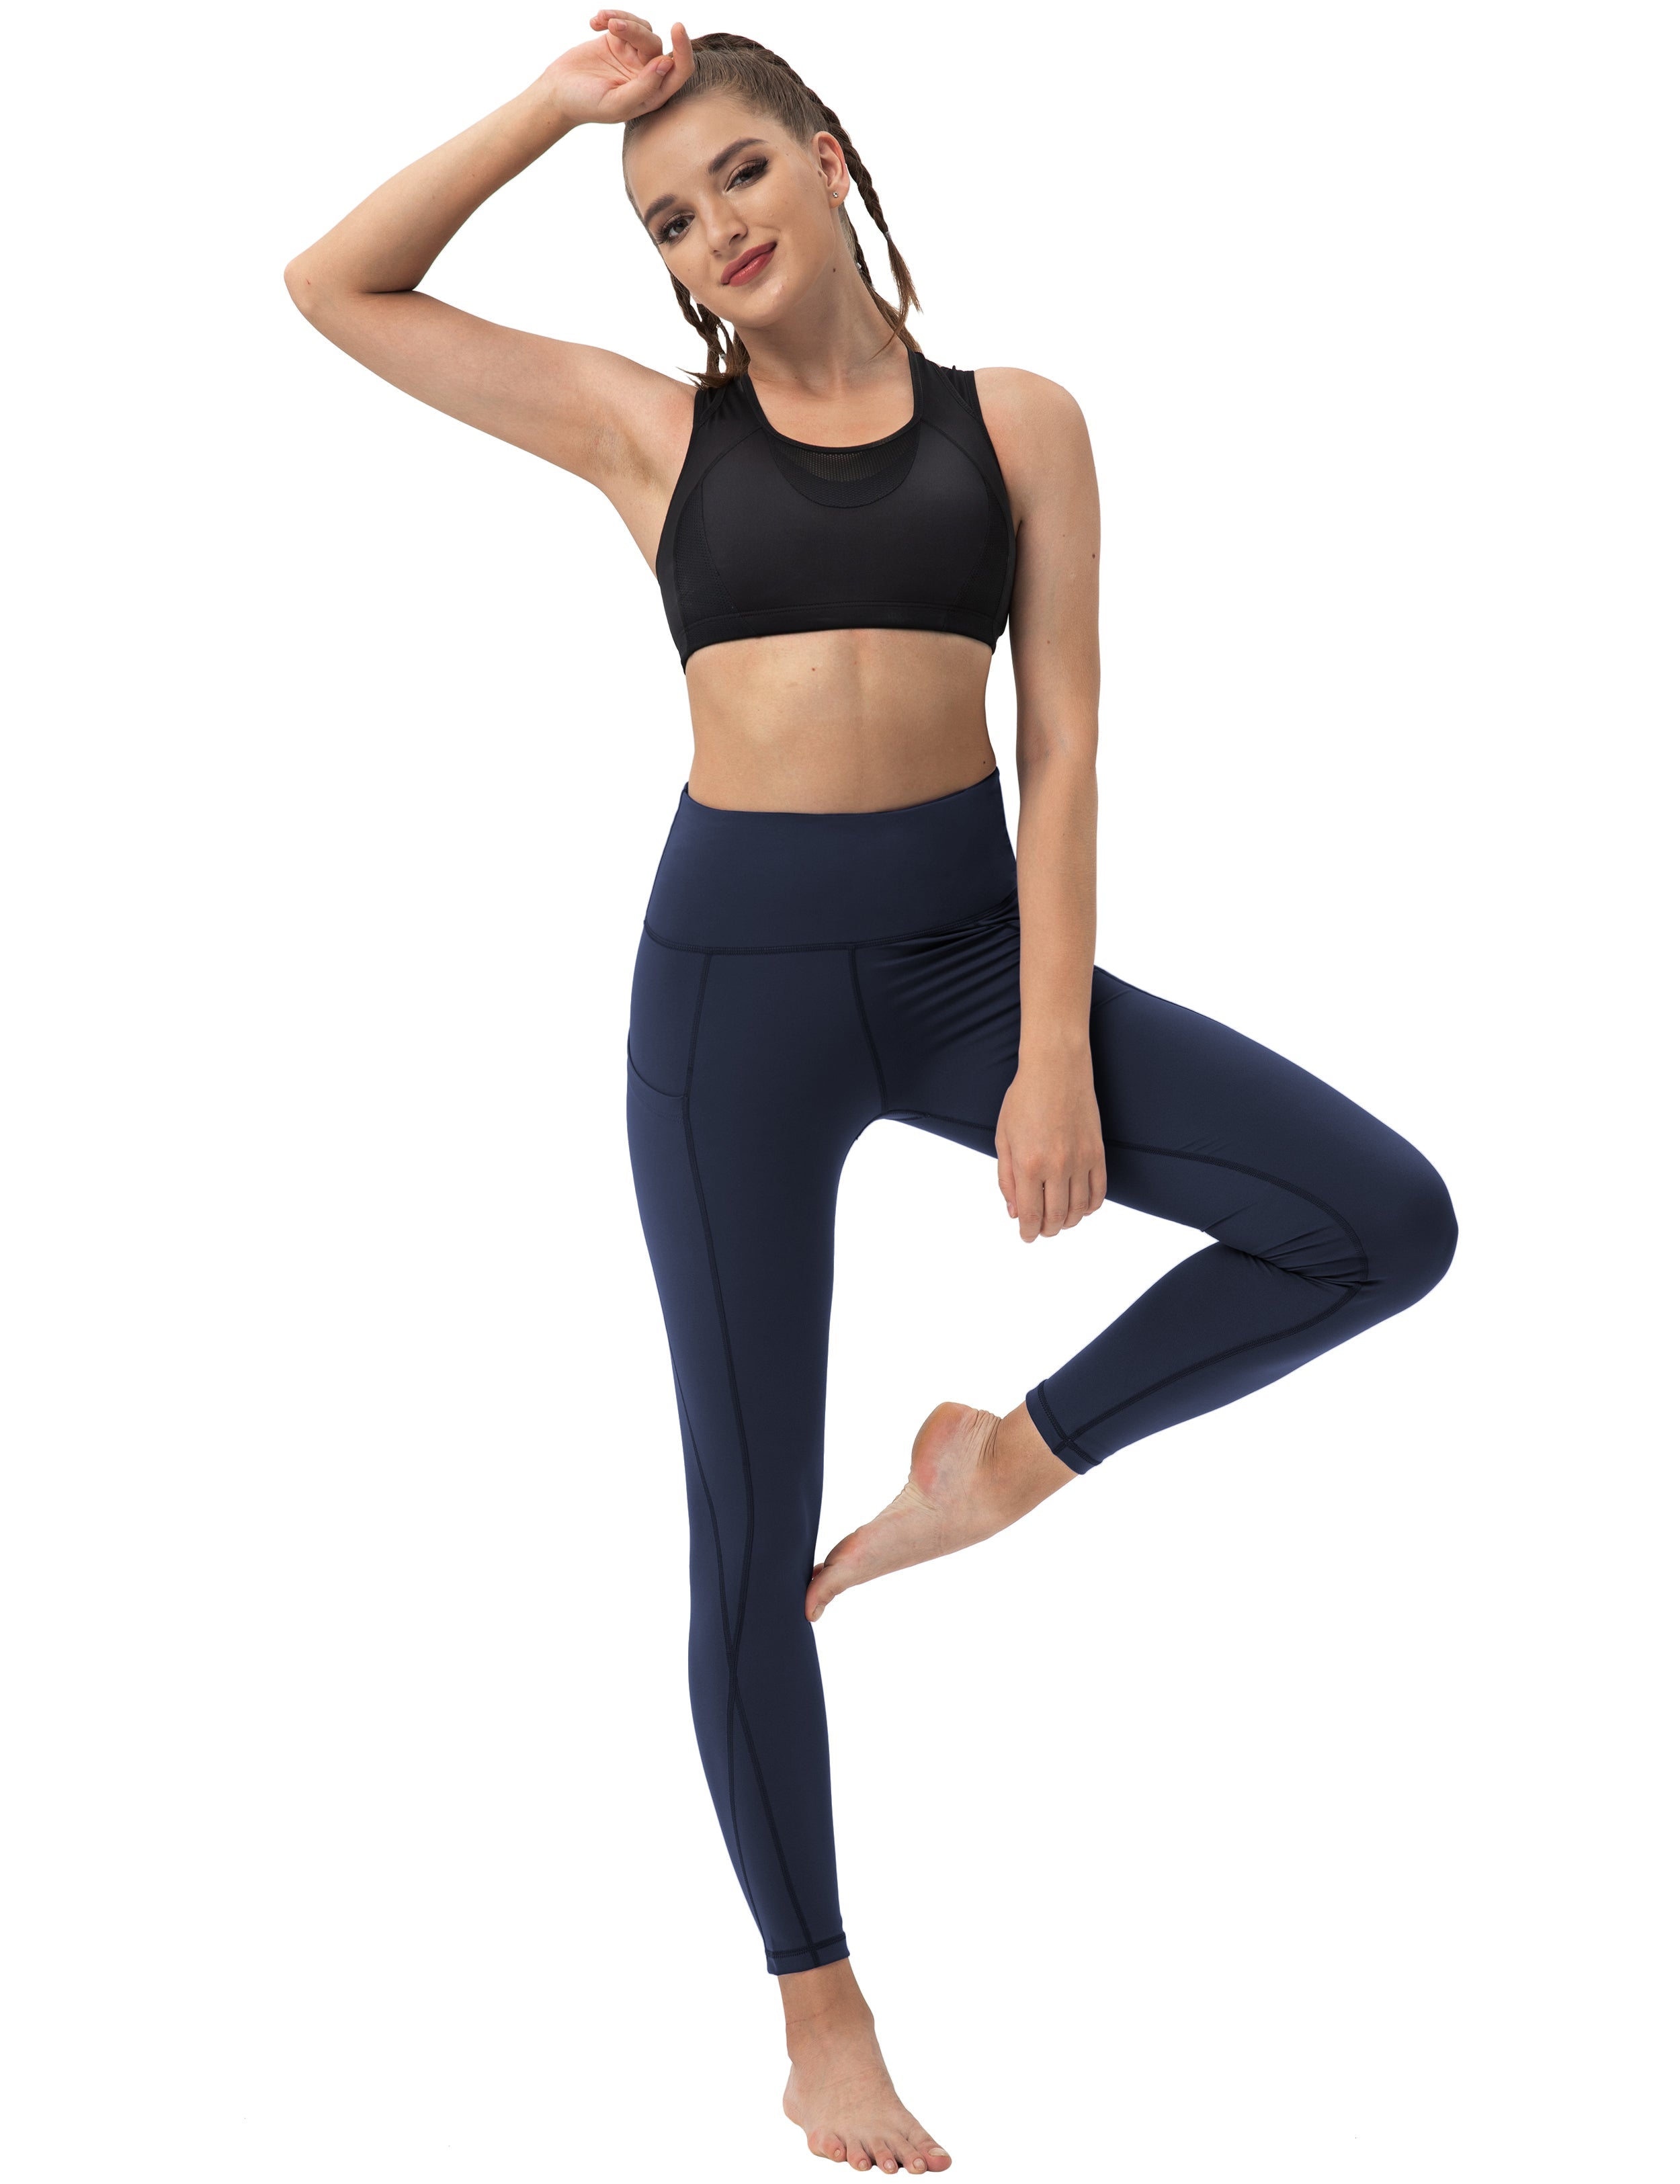 High Waist Side Pockets yogastudio Pants darknavy 75% Nylon, 25% Spandex Fabric doesn't attract lint easily 4-way stretch No see-through Moisture-wicking Tummy control Inner pocket